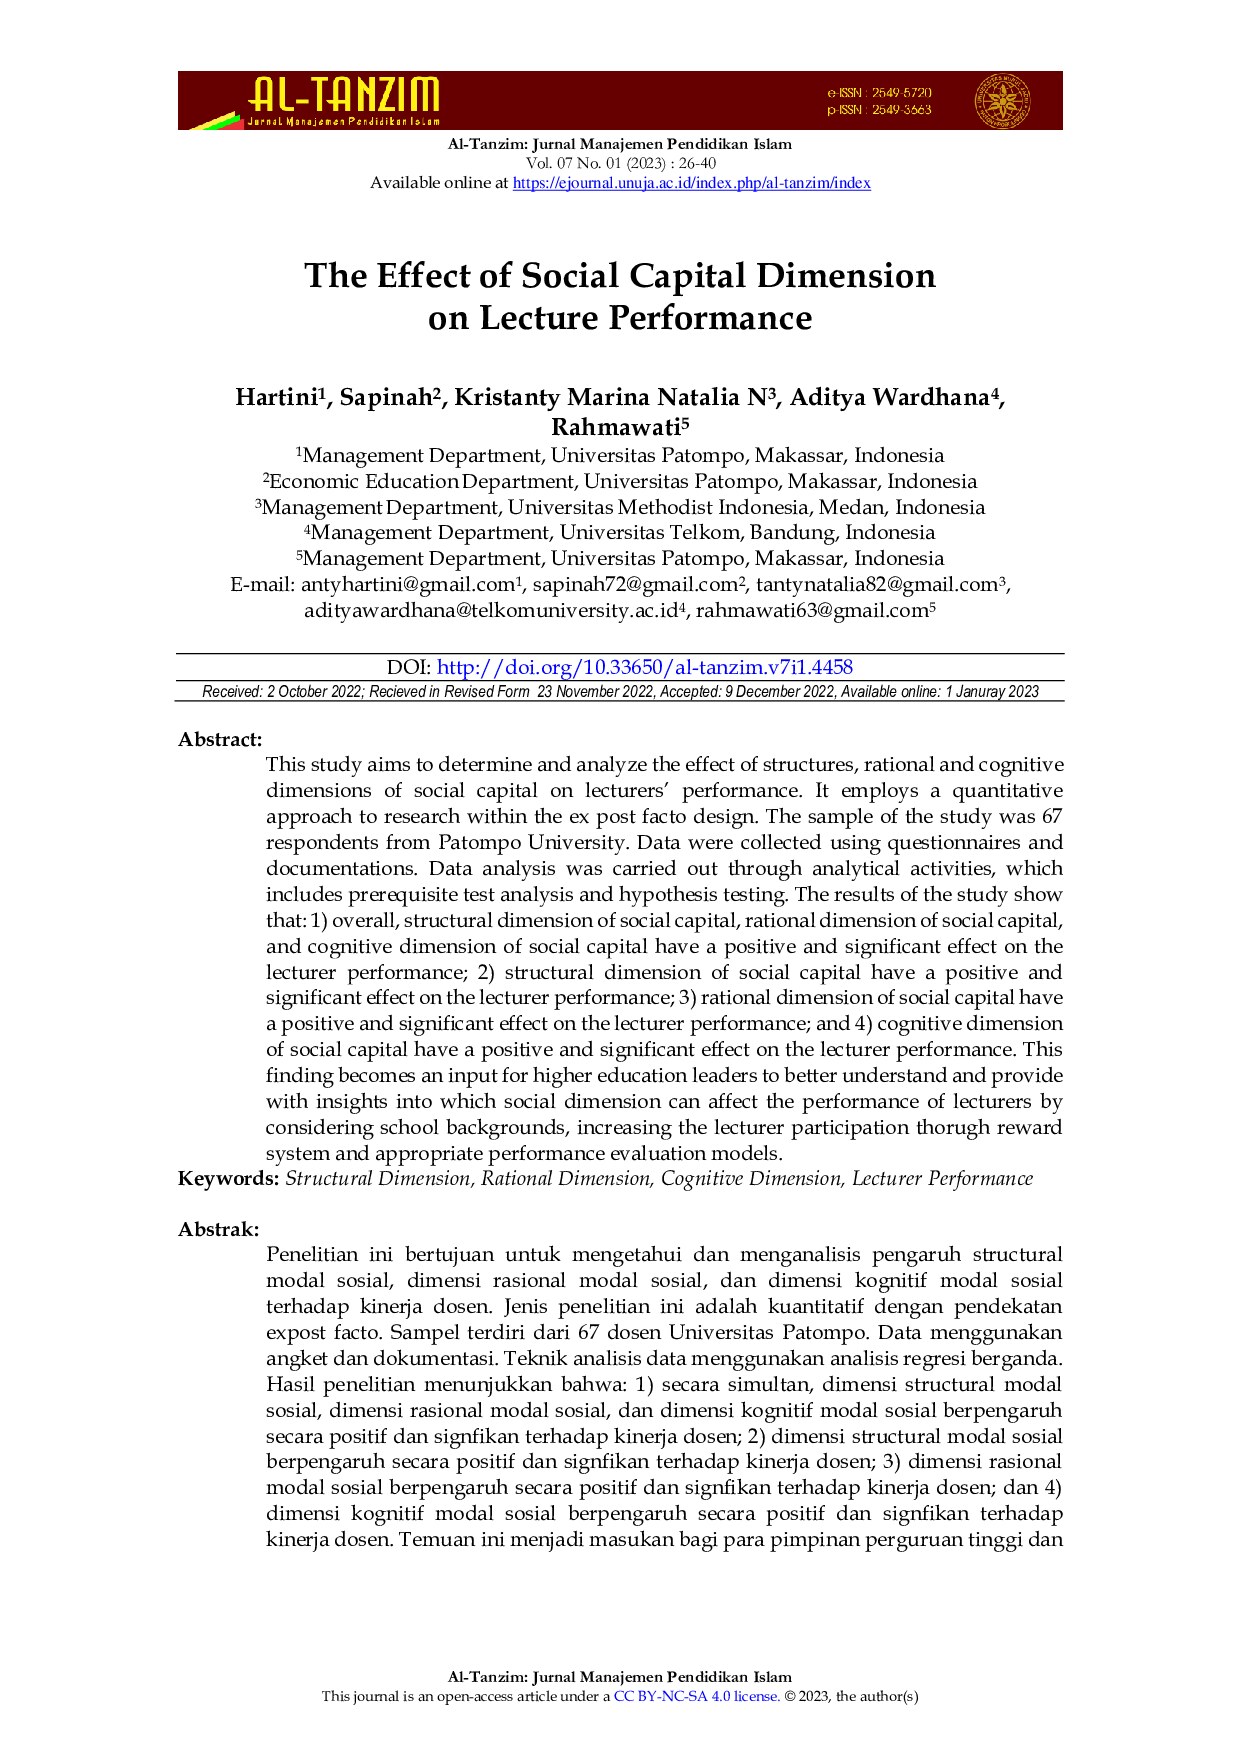 The Effect of Social Capital Dimension on Lecture Performance